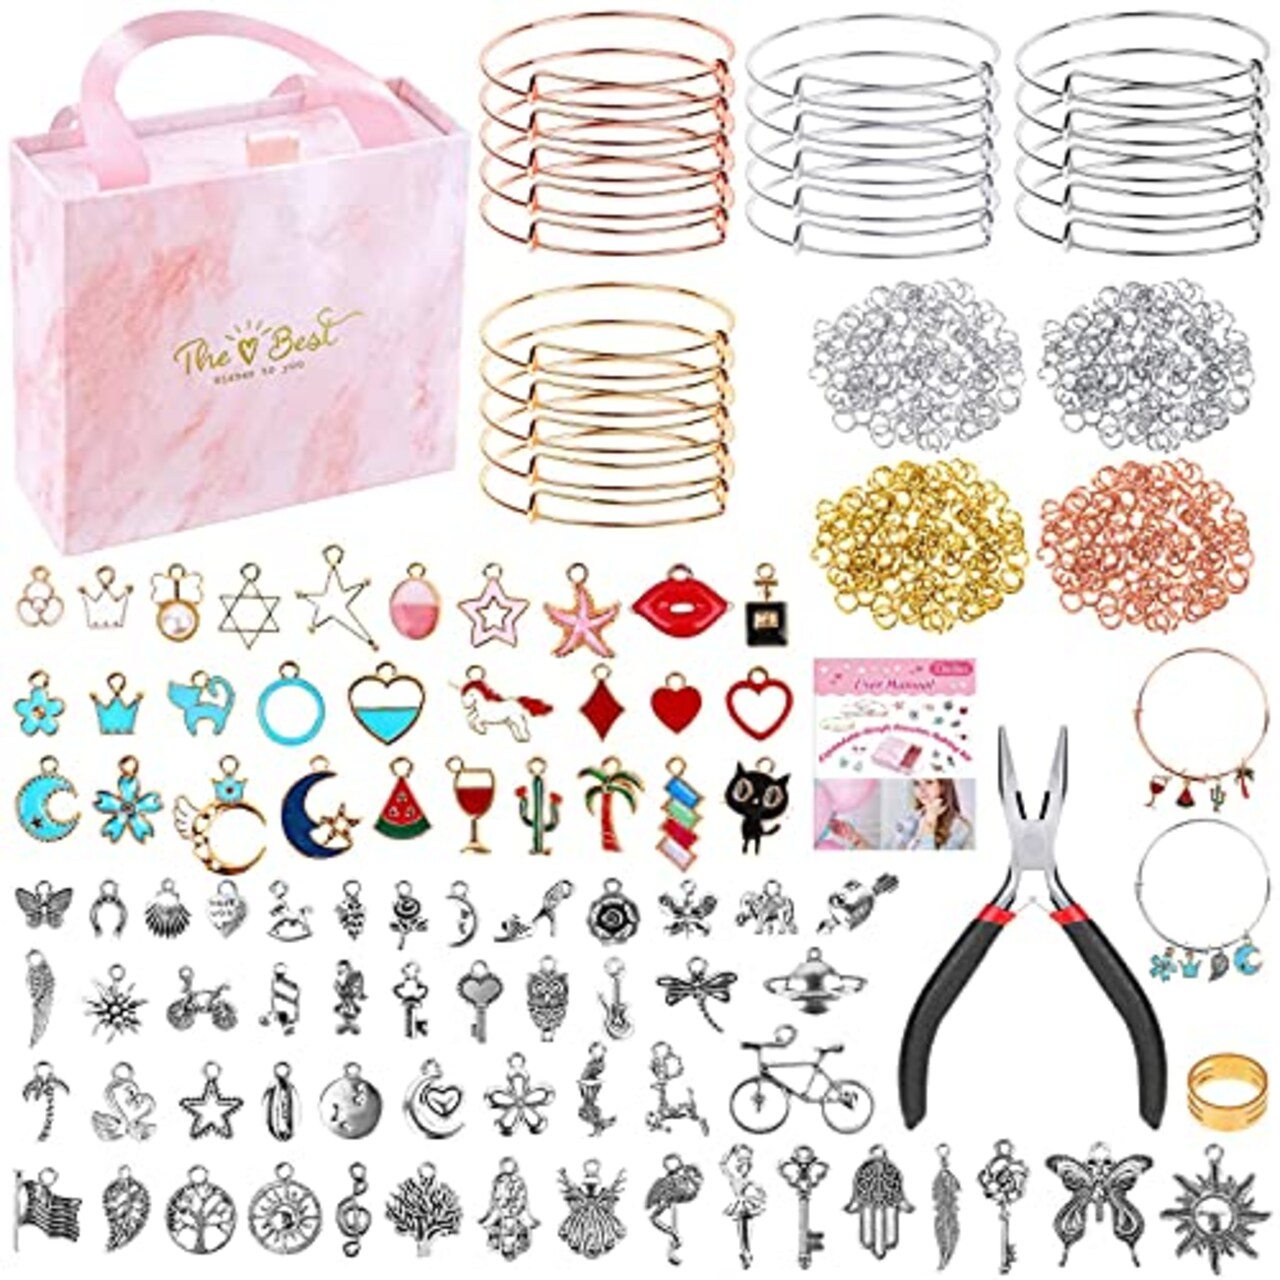 300Pcs Bangle Bracelets Making Kit, Thrilez Charm Bracelet Making Kit with  Expandable Bangles, Charms, Jump Rings and Pliers for Jewelry Making Bangle  Bracelets (with Gift Box and Tools)